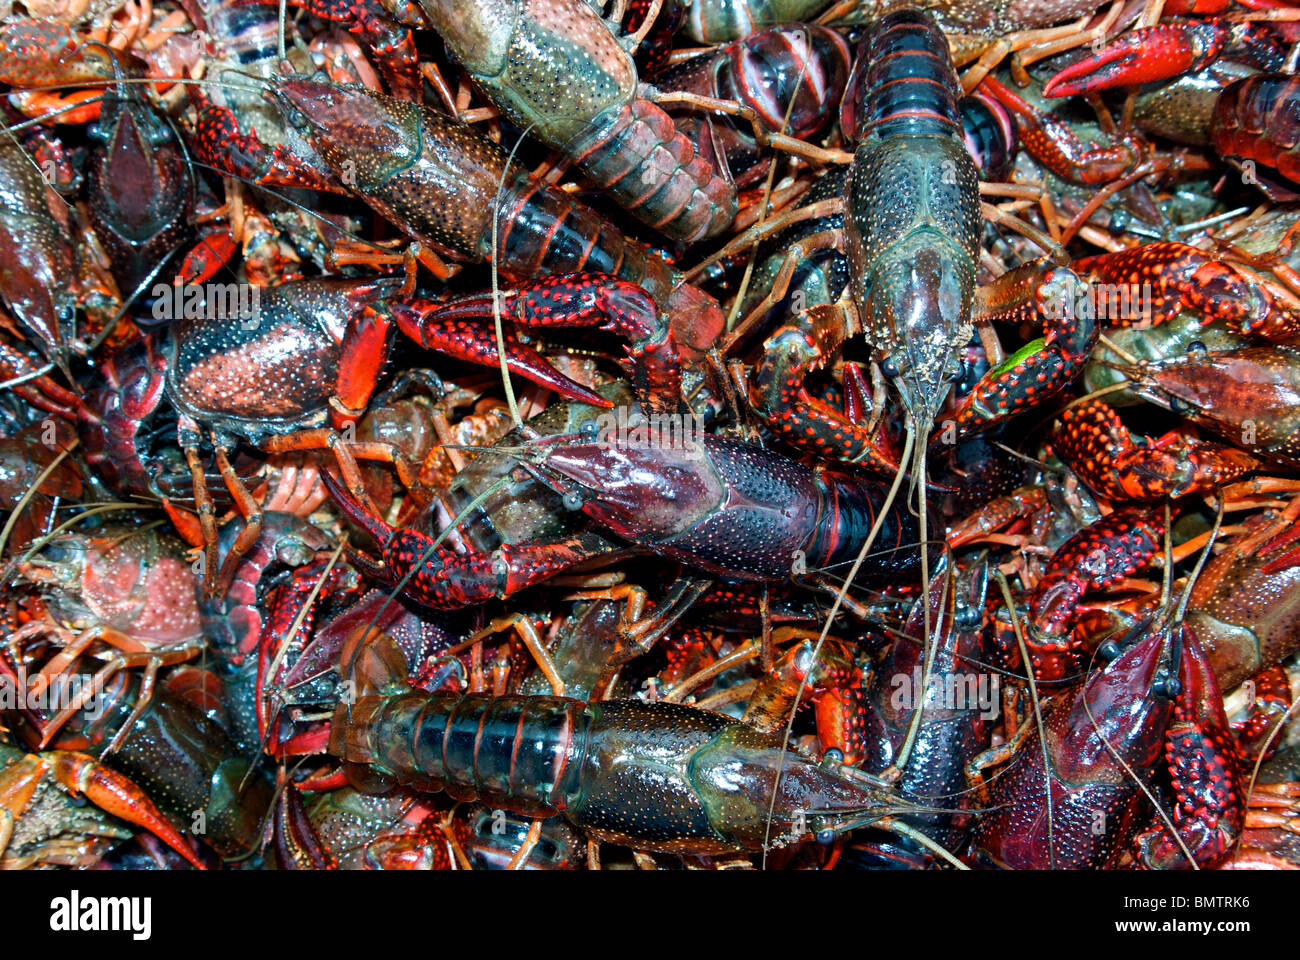 Big collection of live Louisiana crawfish (Cambaridae) ready for boiling Stock Photo